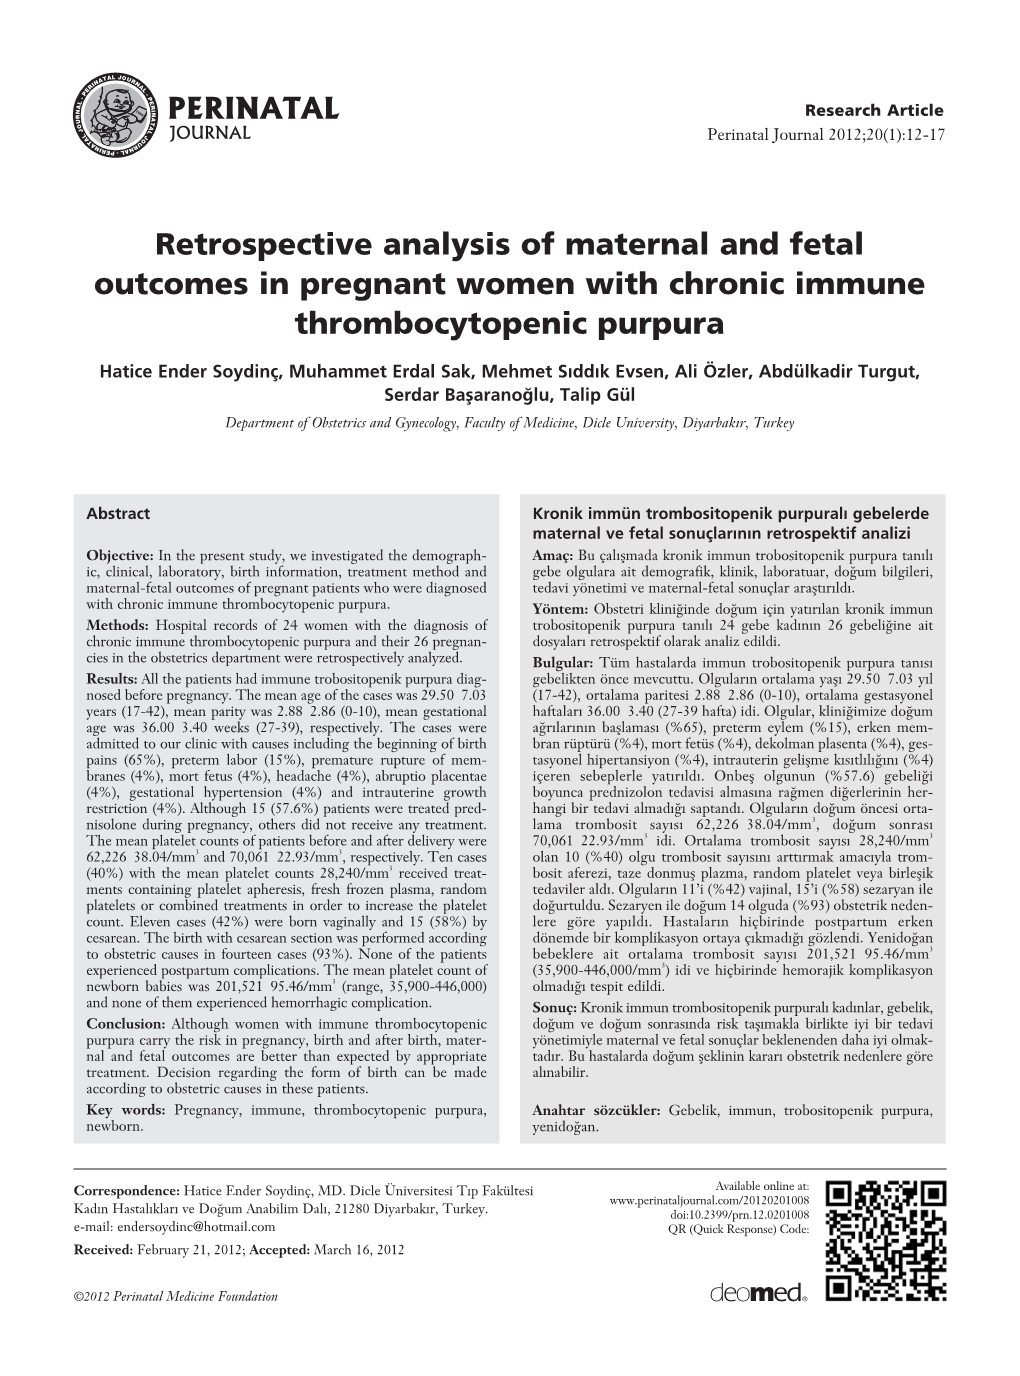 Retrospective Analysis of Maternal and Fetal Outcomes in Pregnant Women with Chronic Immune Thrombocytopenic Purpura